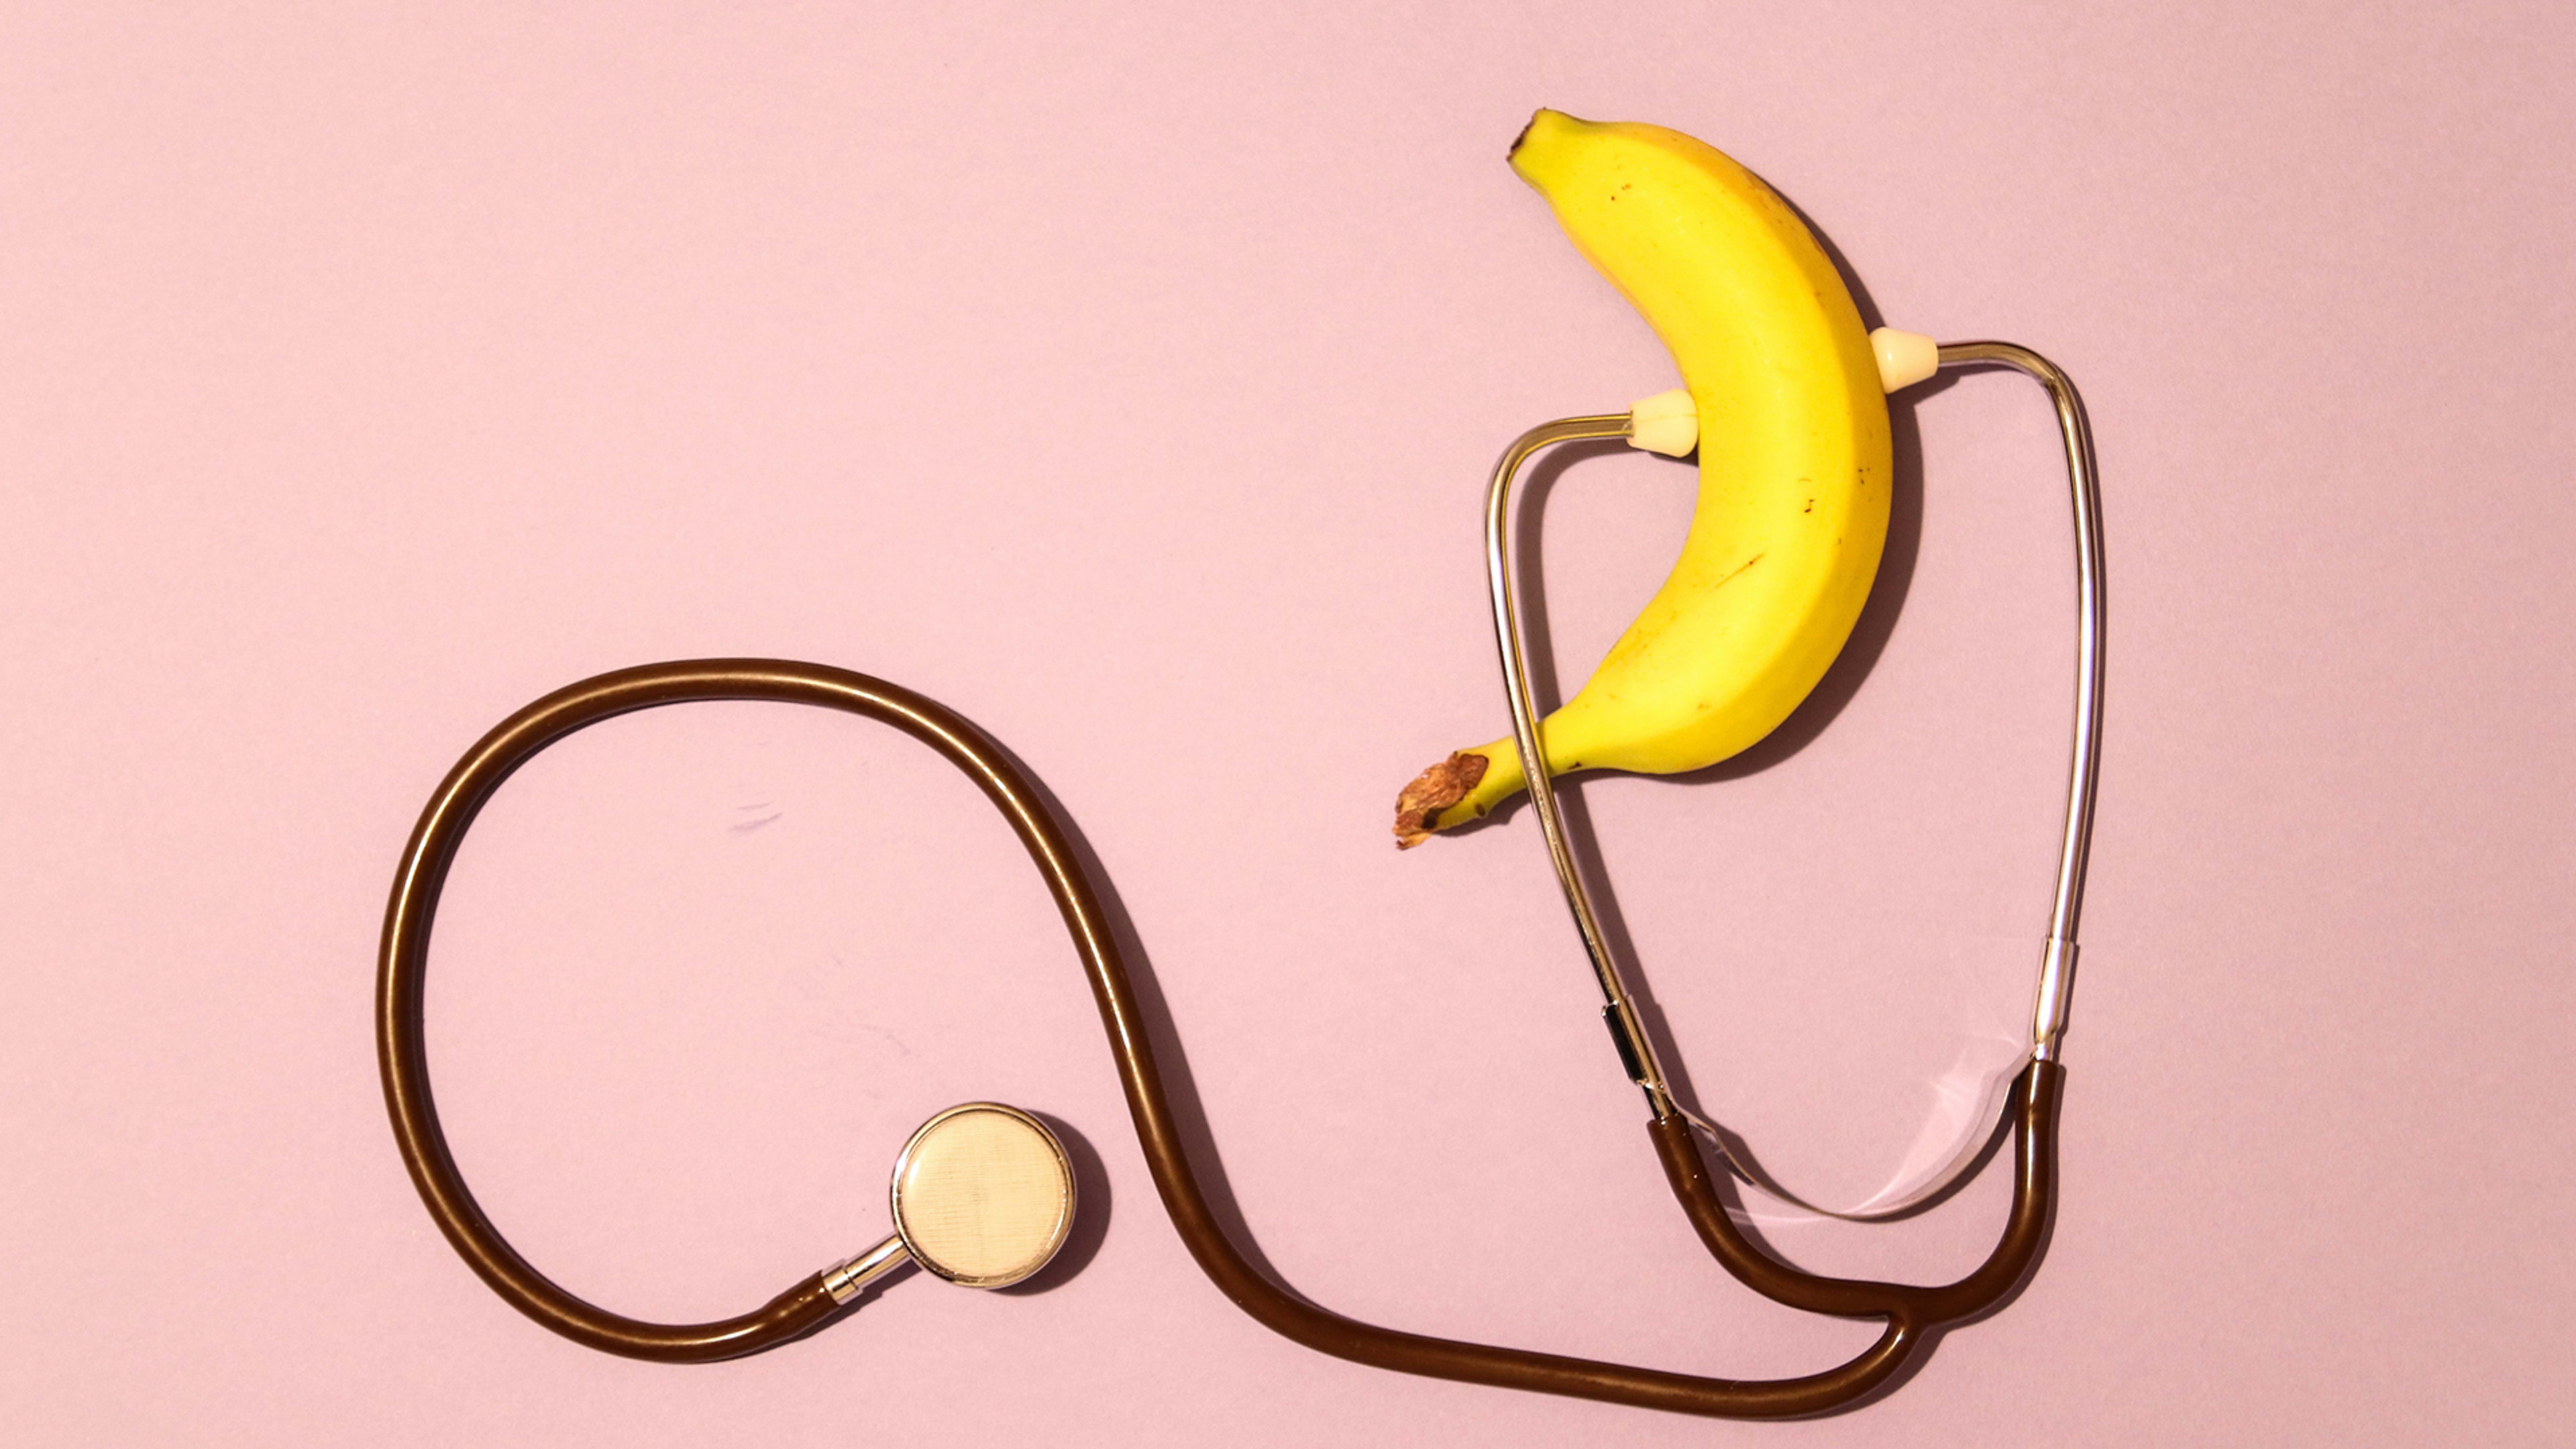 The surprising new sexual problems that draw men to health clinics